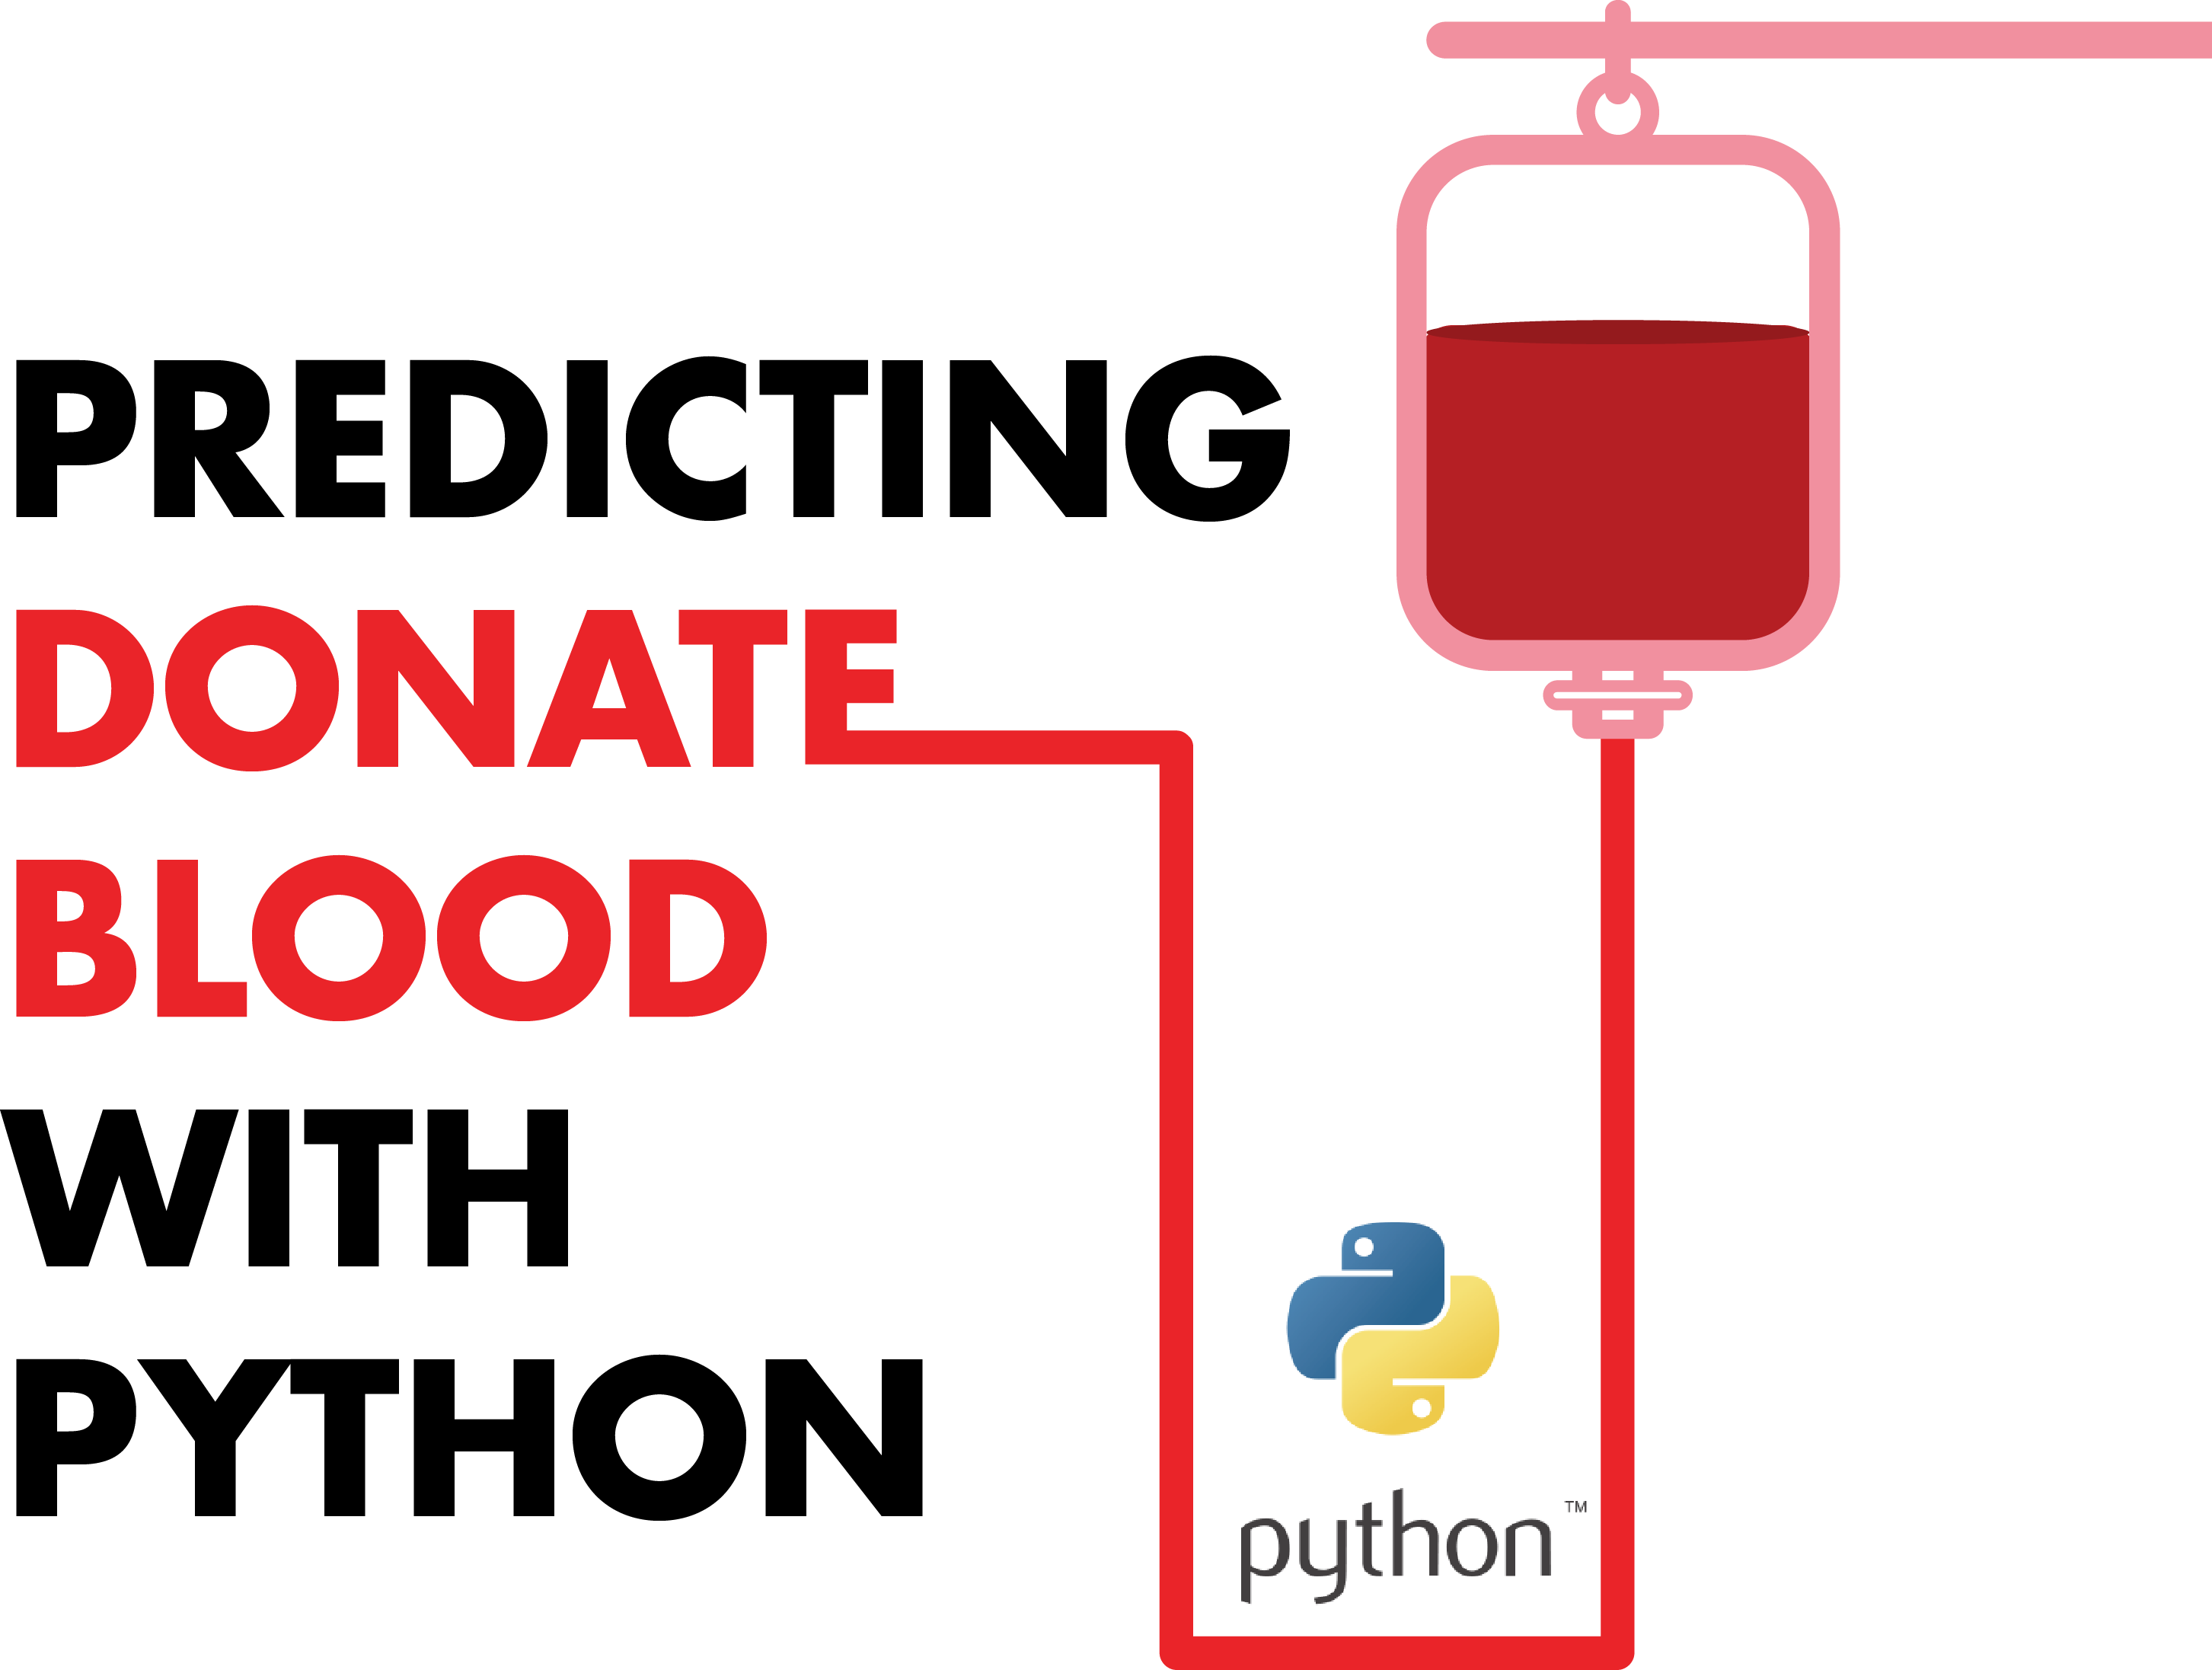 Prediction blood donation witch Python